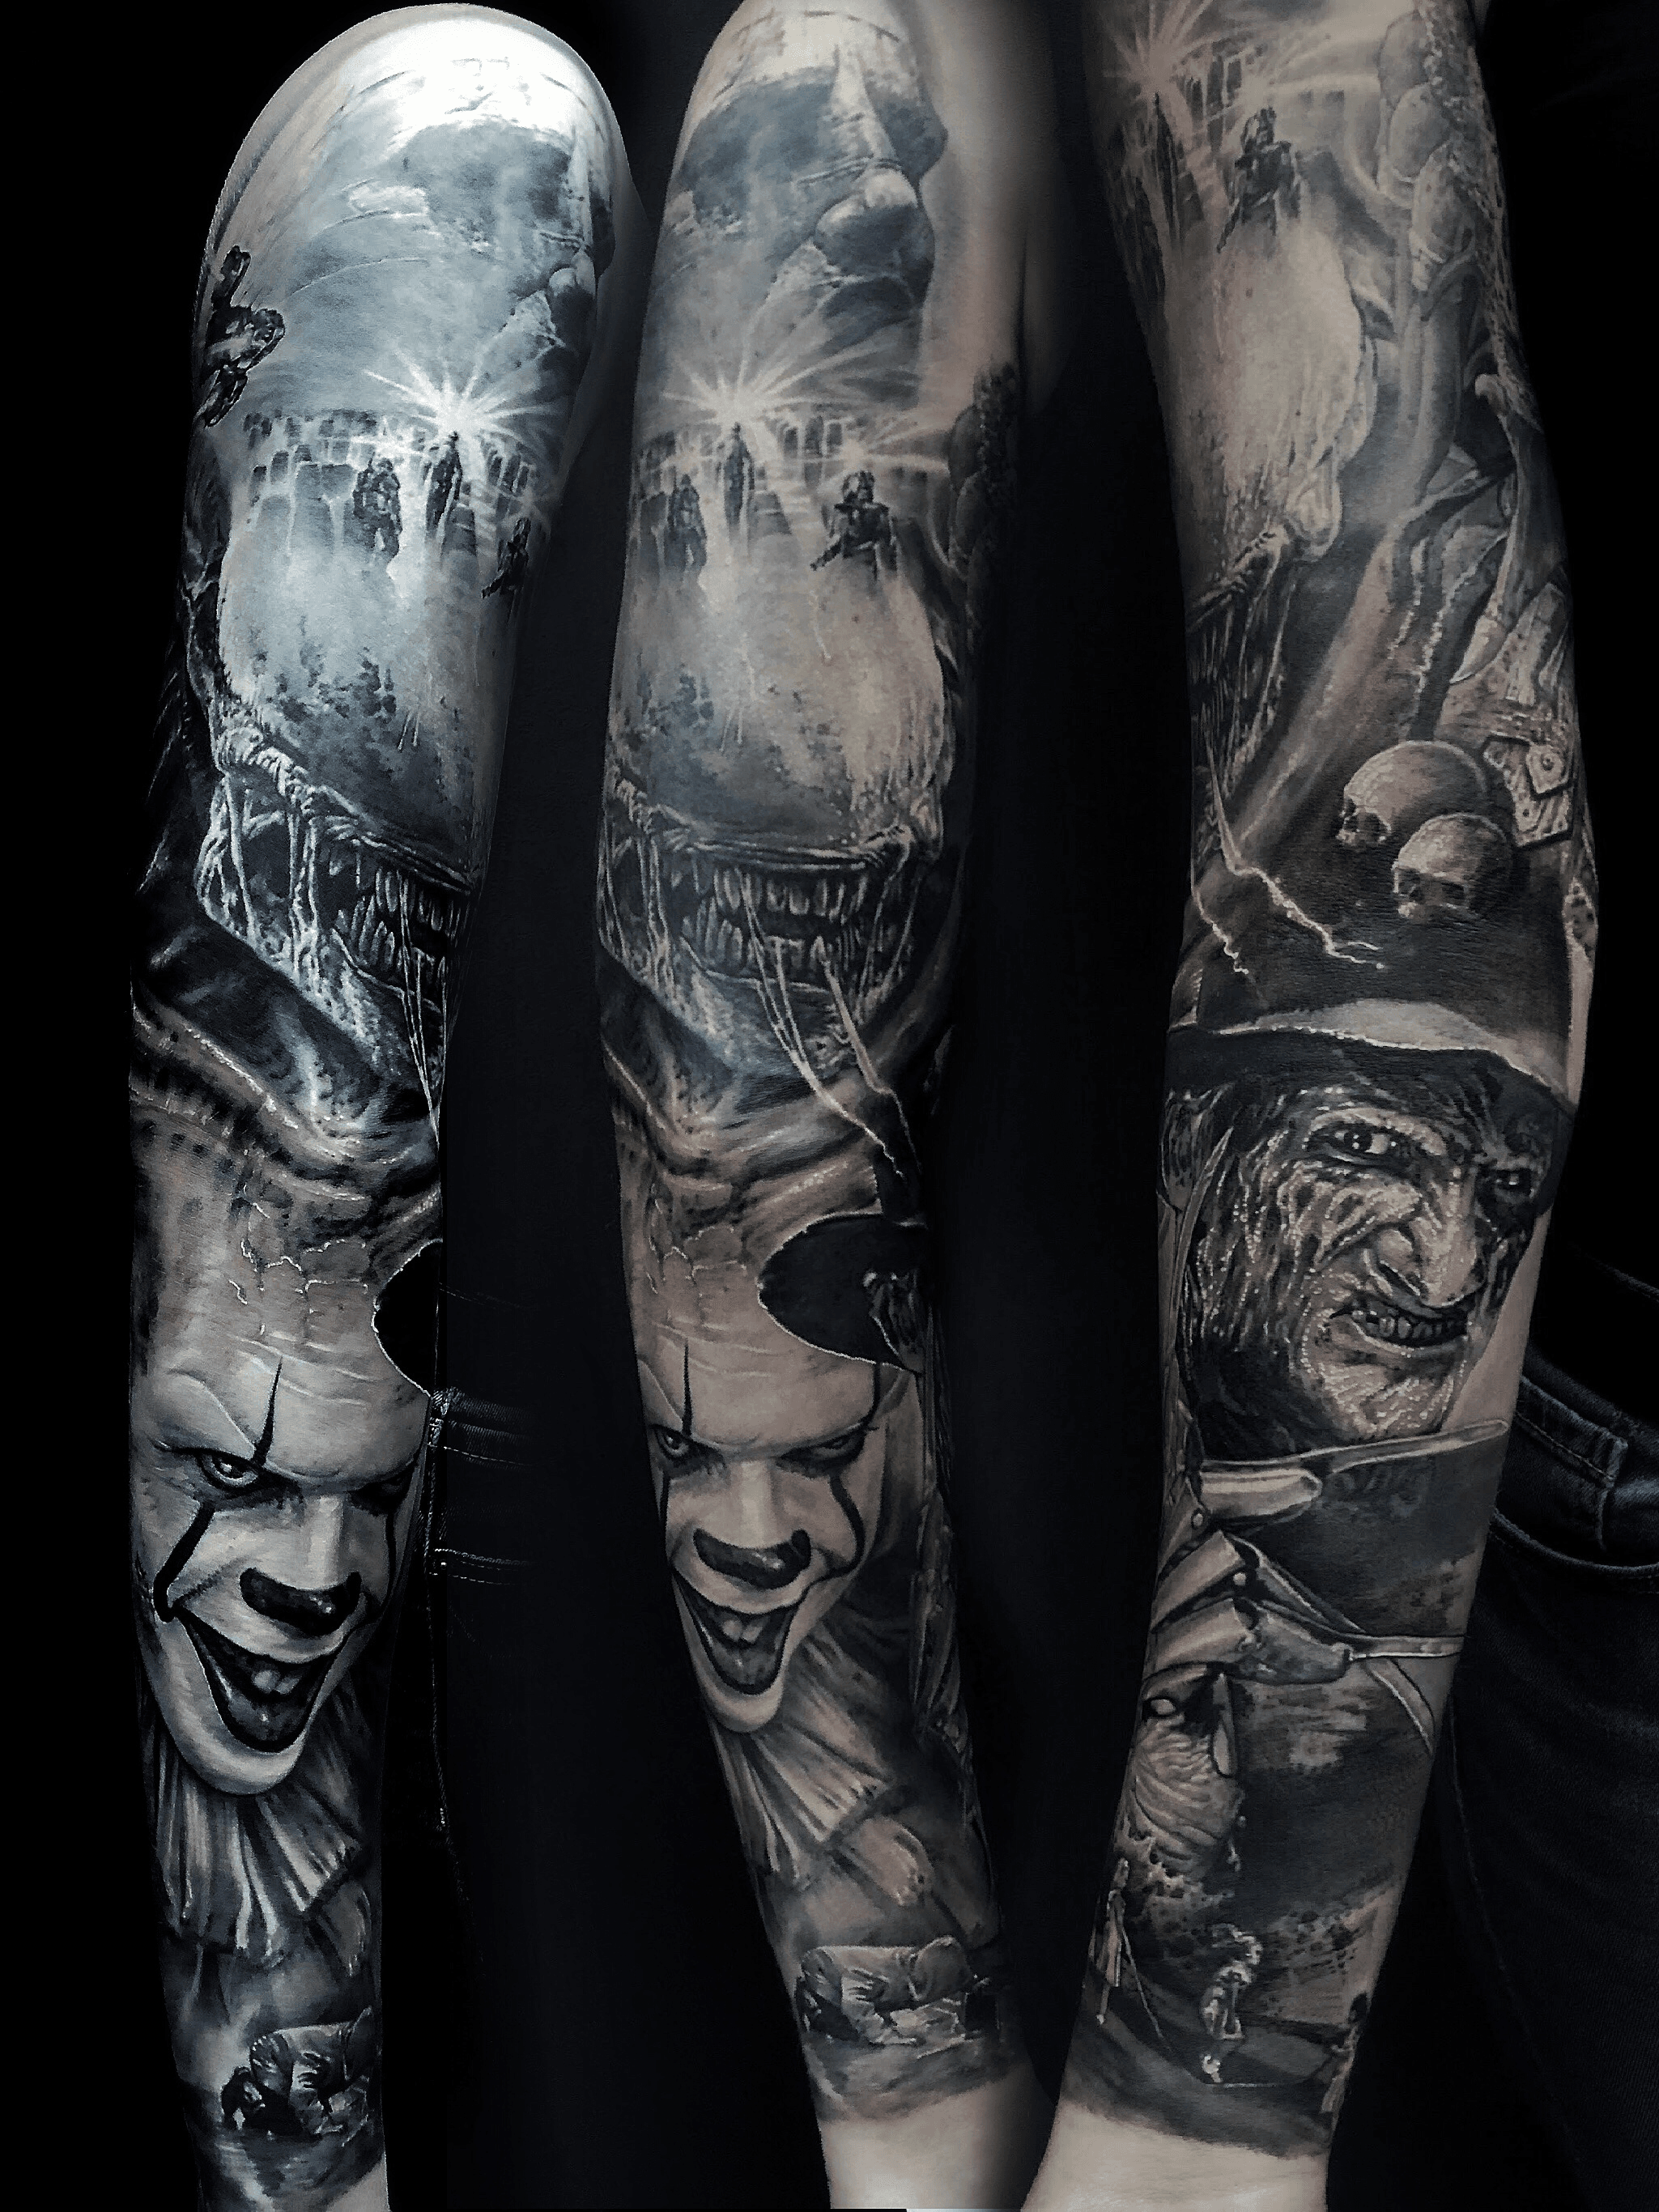 Finished up lower leg horror sleeve with Pennywise Artist Steven House at  Zombie Tattoo in Norco Ca  rtattoos